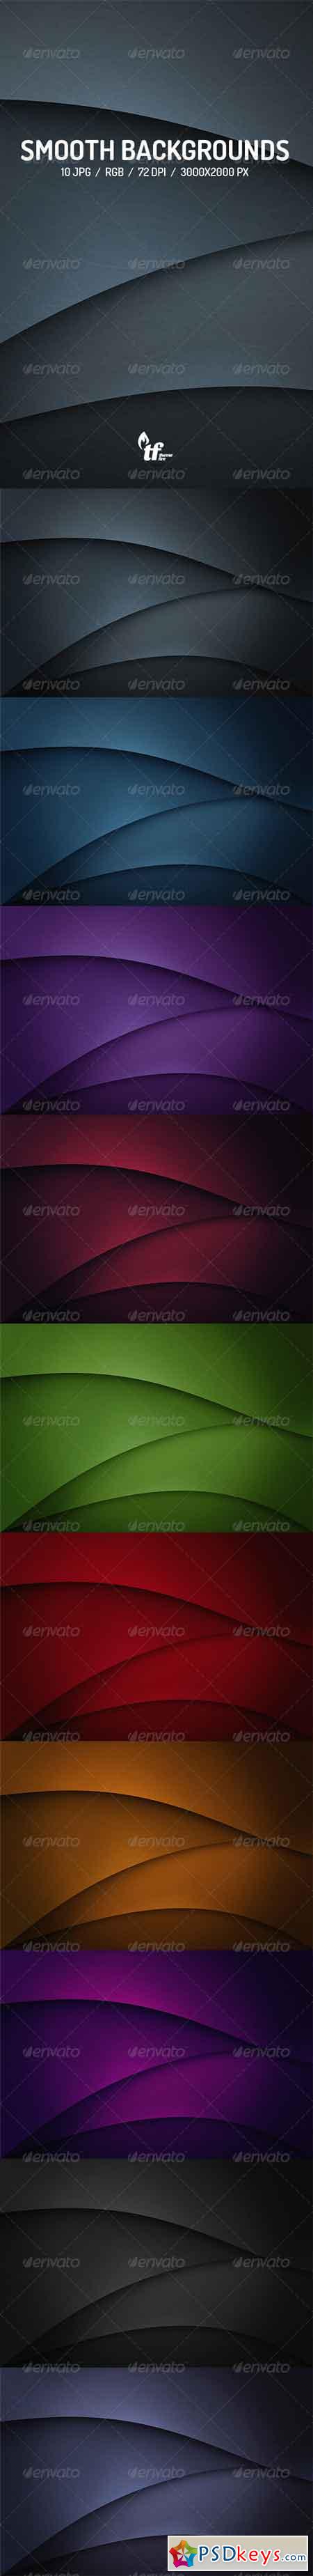 Flat Smooth Flow Backgrounds 7763856